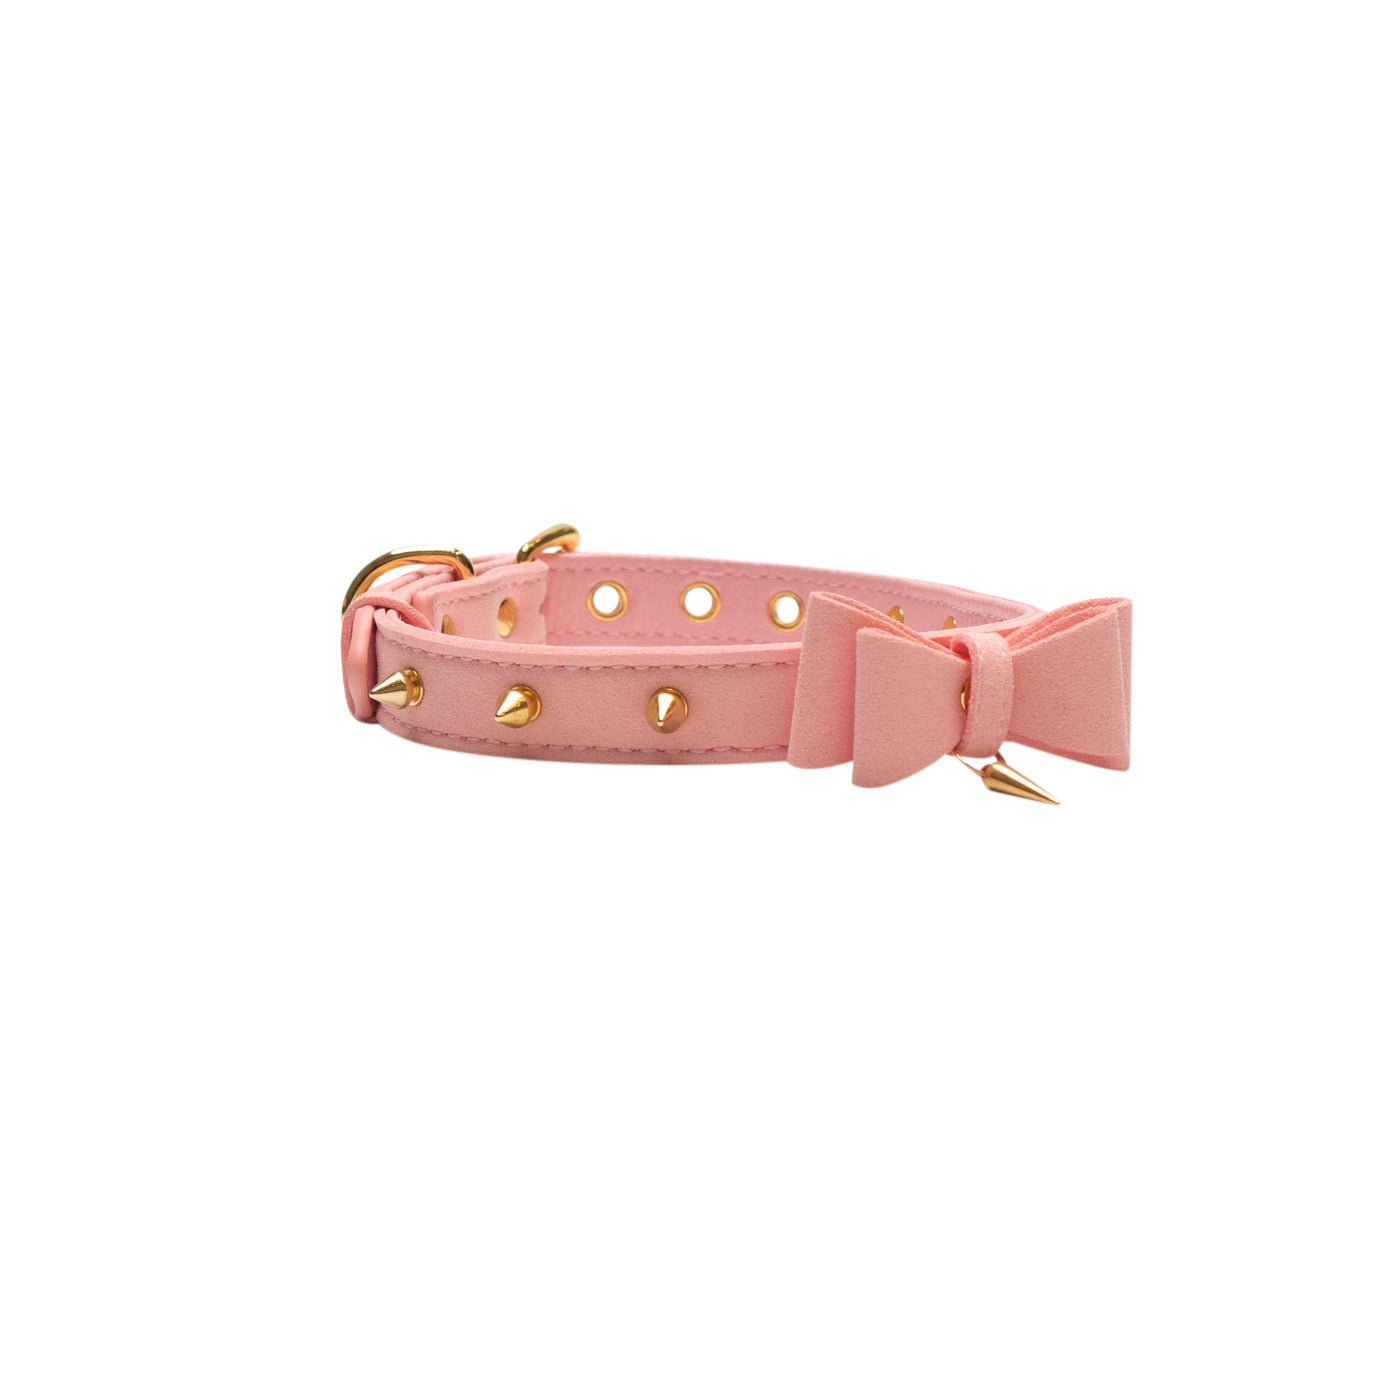 Collar - Pink And Gold Spikes - DDLG Choker